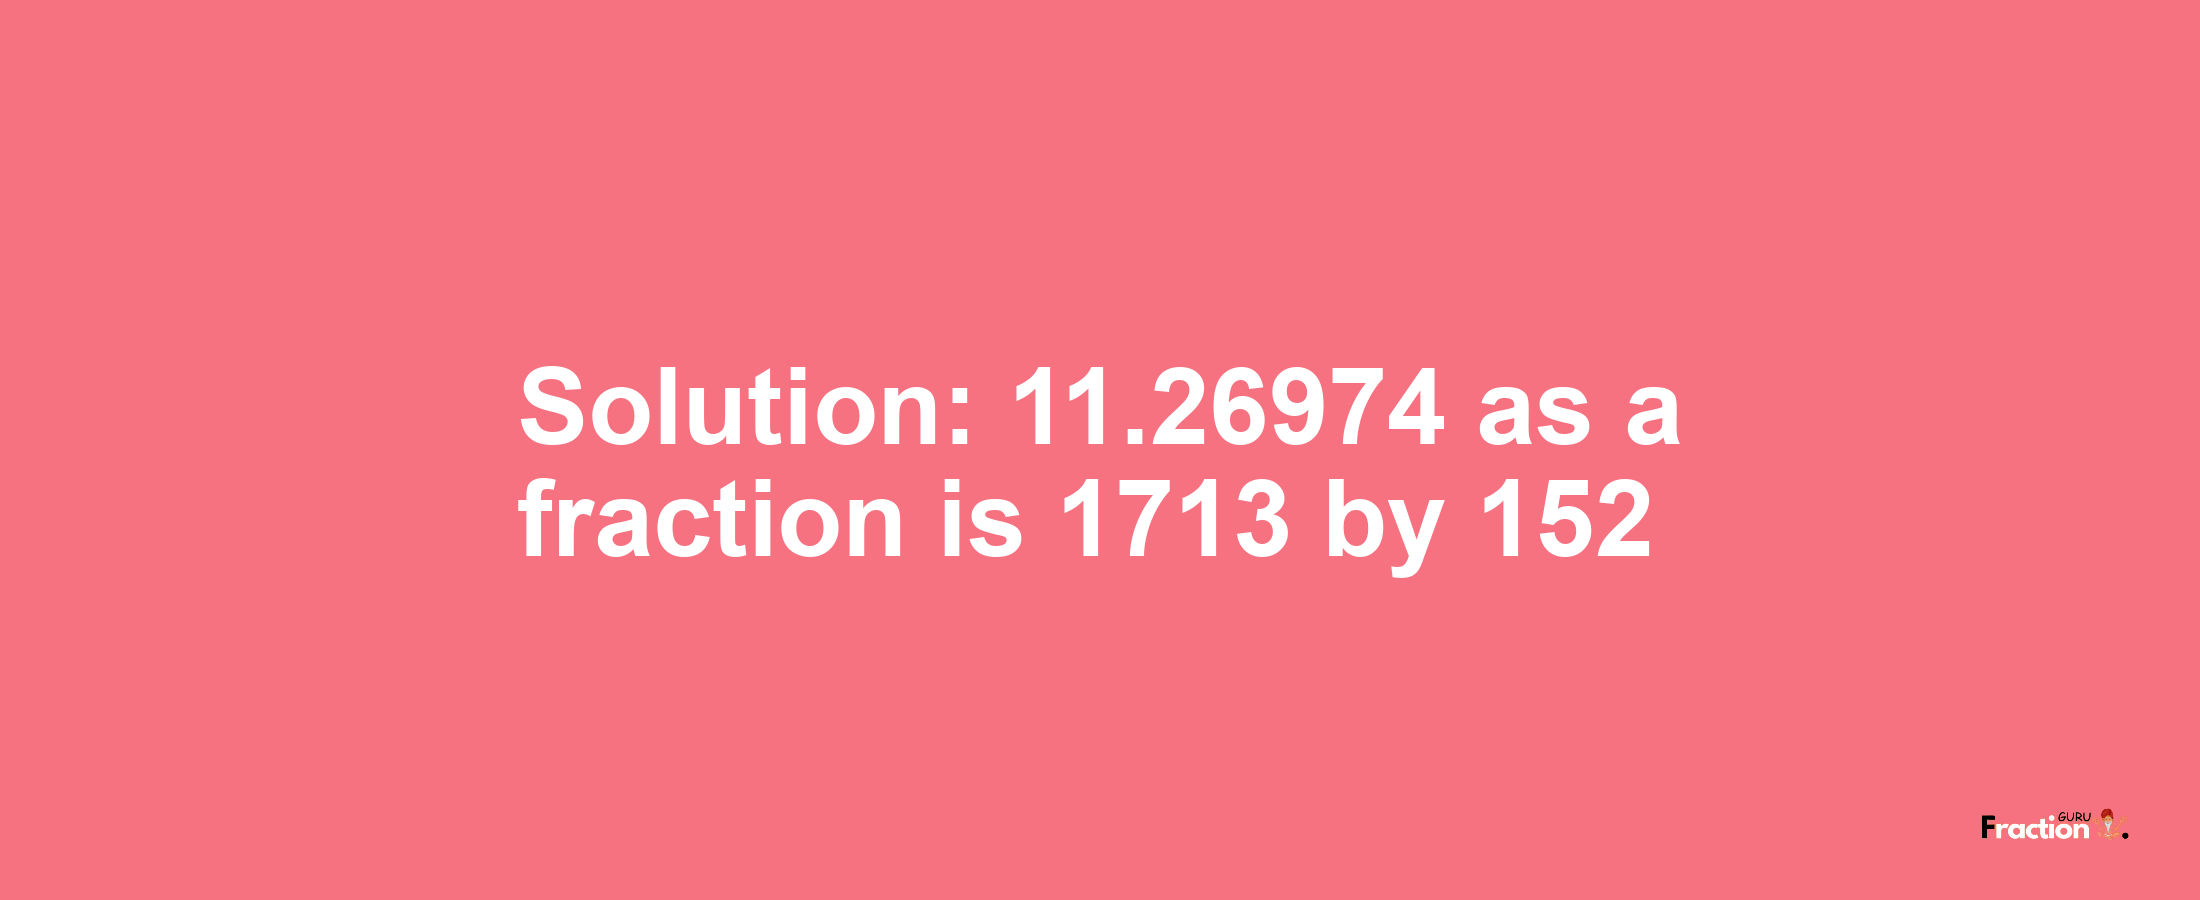 Solution:11.26974 as a fraction is 1713/152